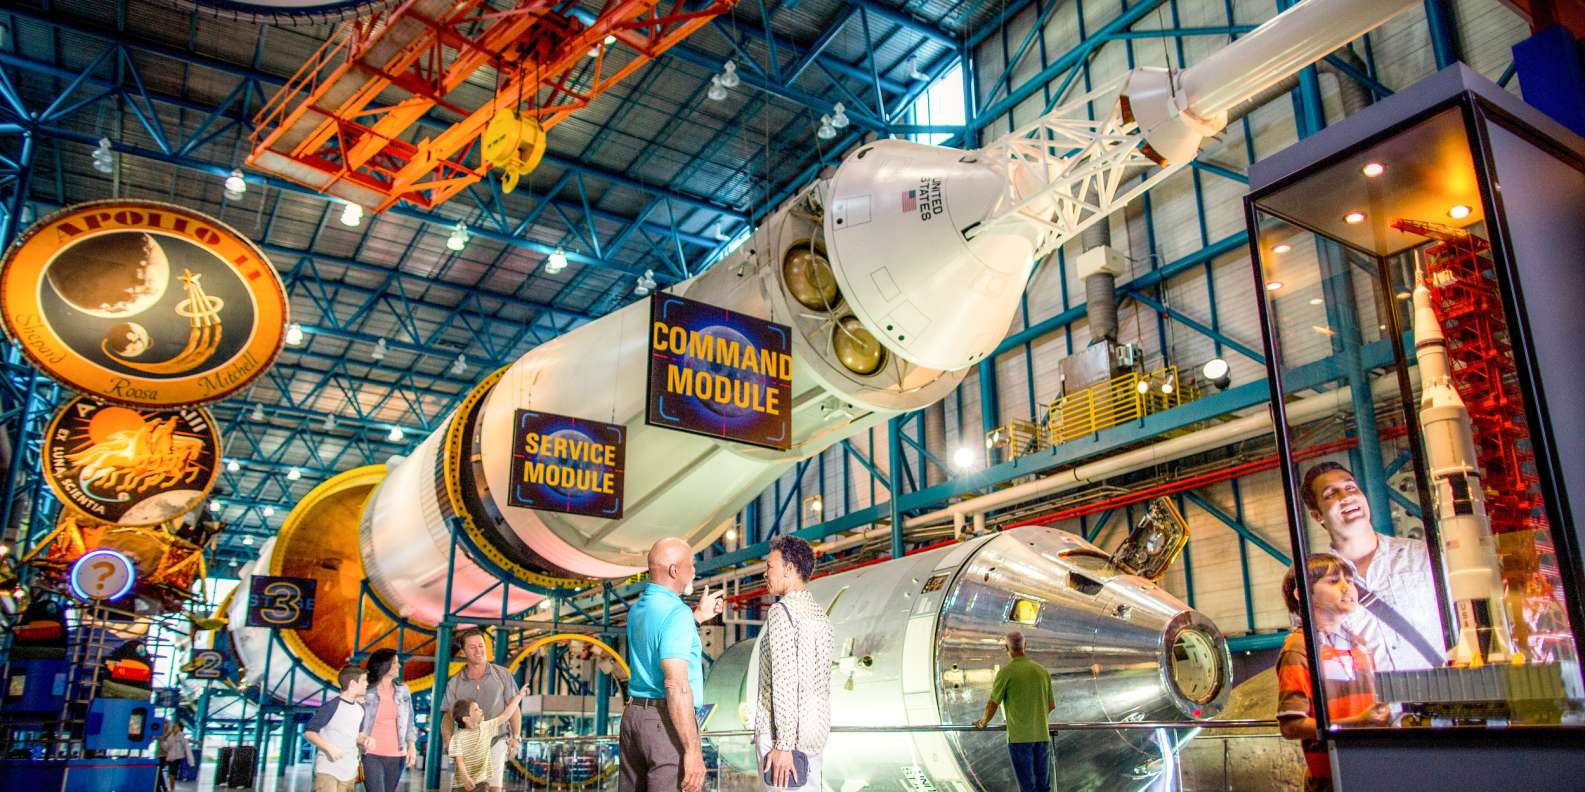 Can You Take Food Into Kennedy Space Center? The Family Vacation Guide